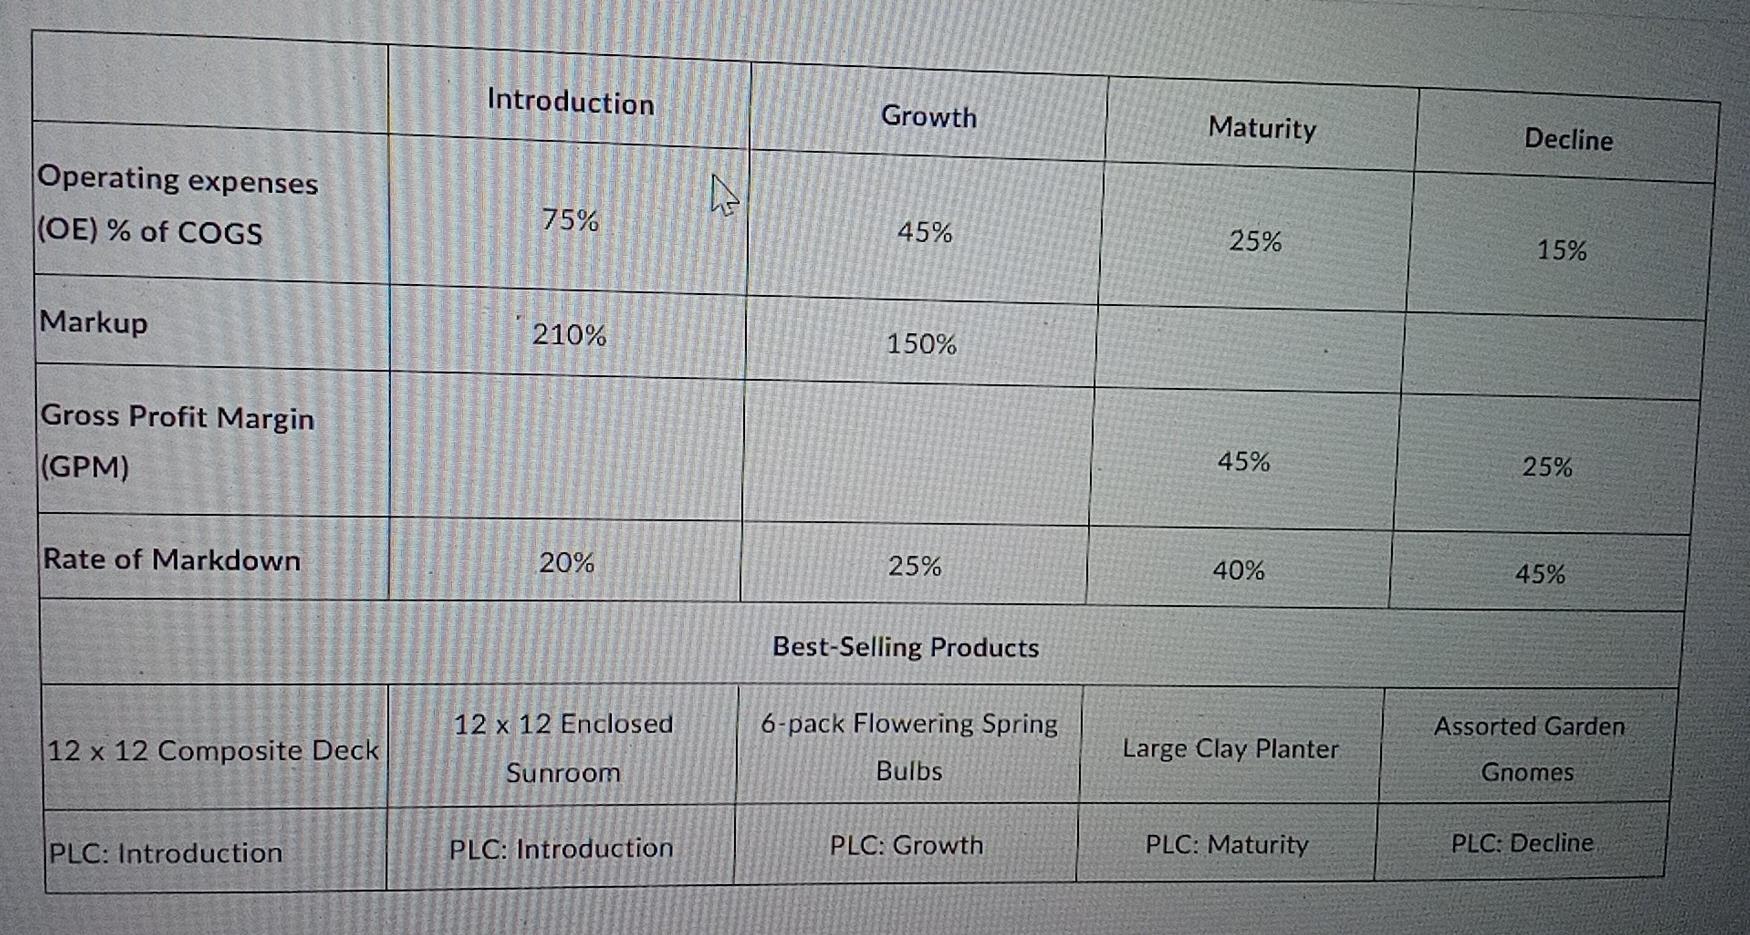 Introduction Growth Maturity Decline Operating expenses (OE) % of COGS A75% 45% 25% 15% Markup 210% 150% Gross Profit Margin